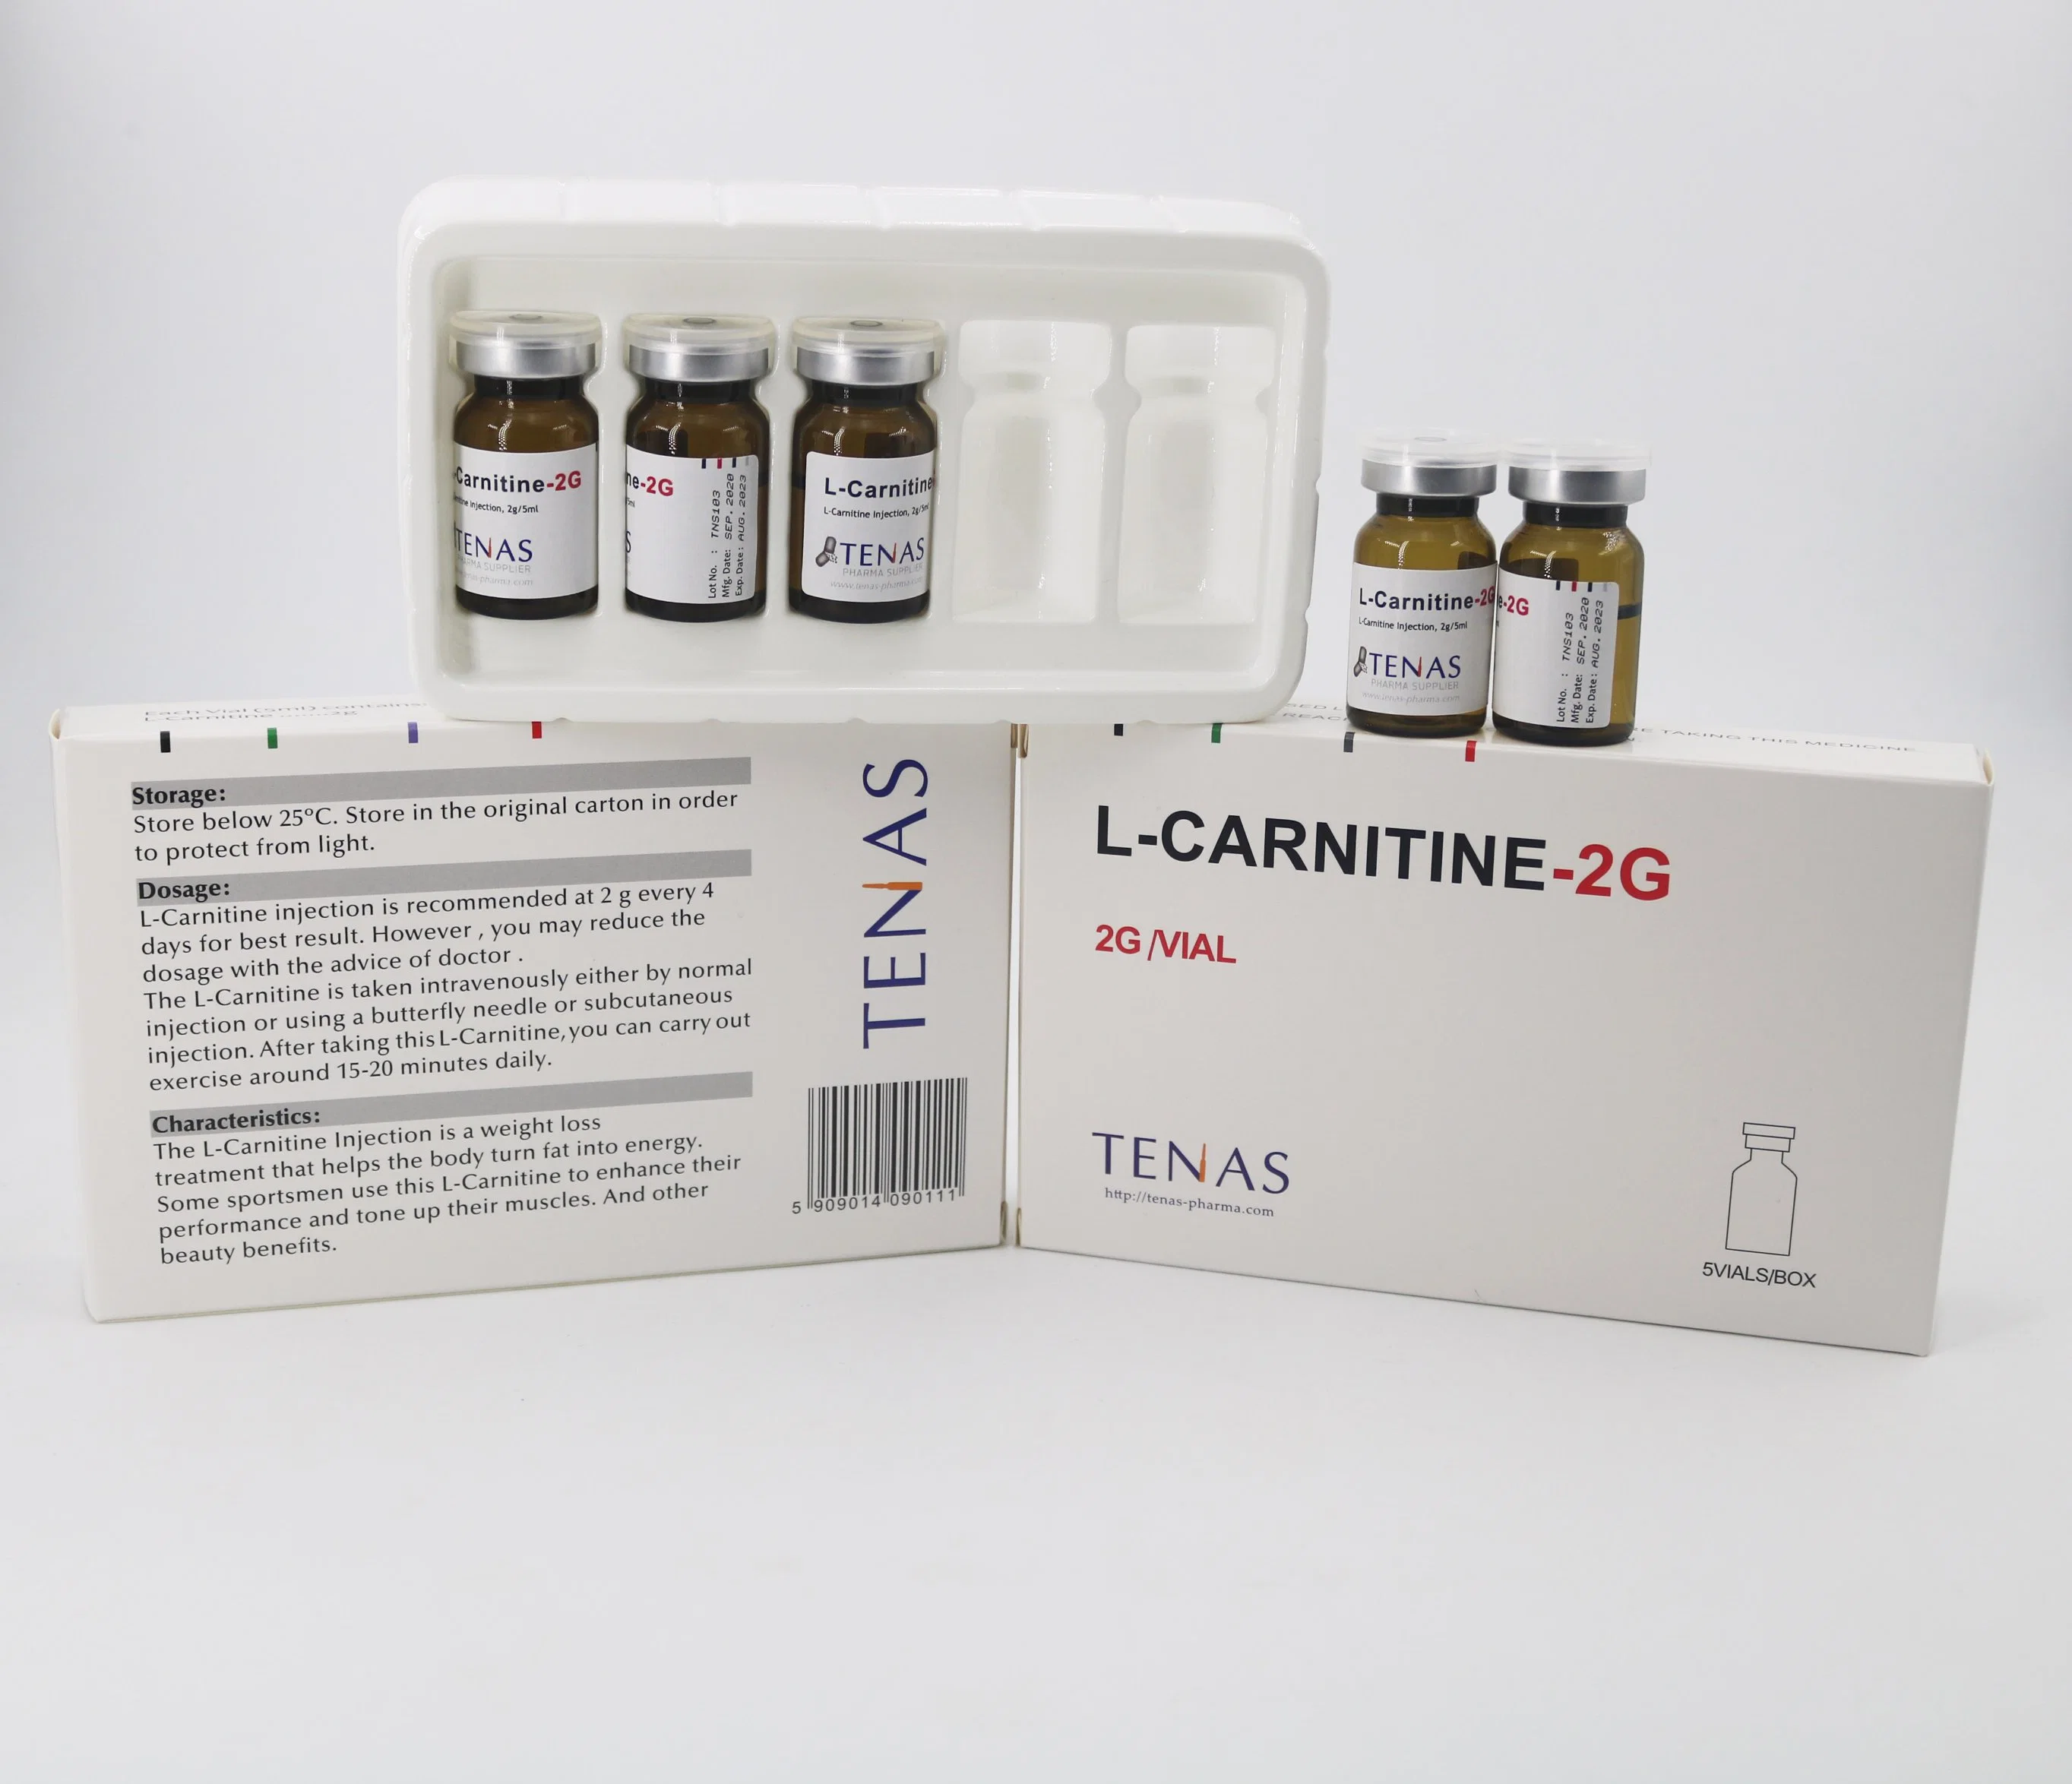 L- Carnitine Liquid Injection Is Used for Bodybuilding, Reducing Fat and Weight Loss